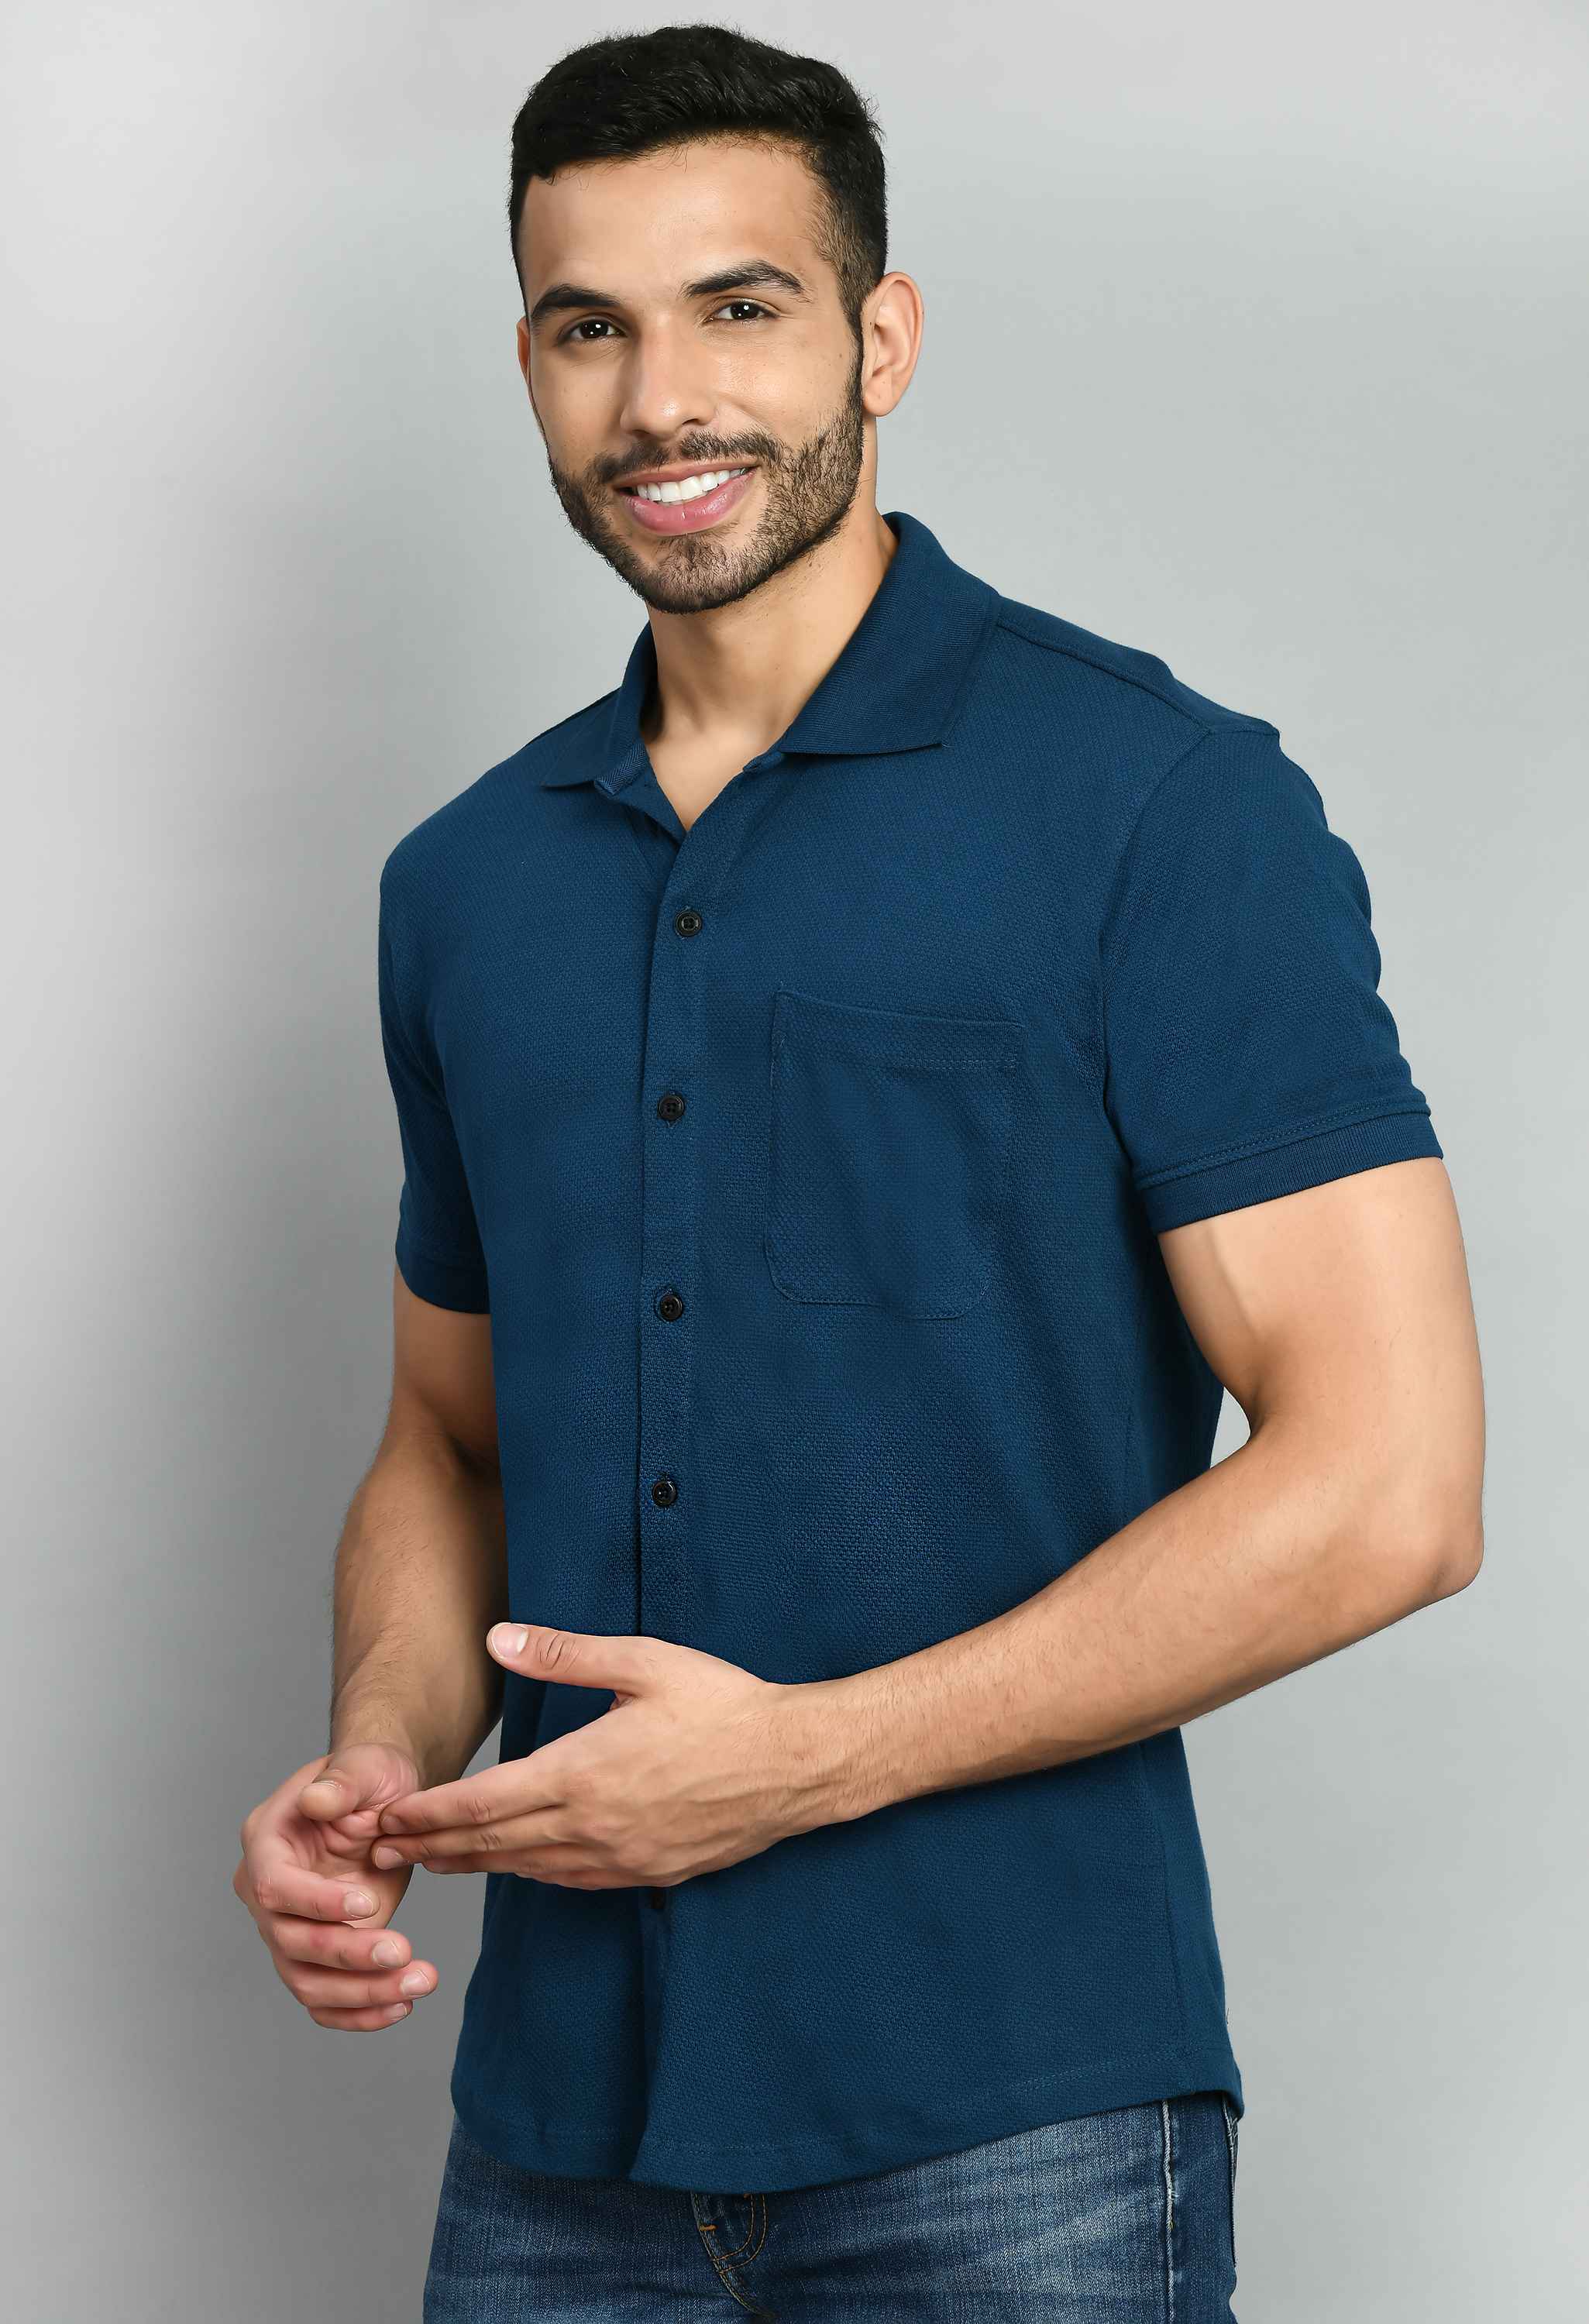 Men's Tint Blue Solid Casual Shirt - SQUIREHOOD